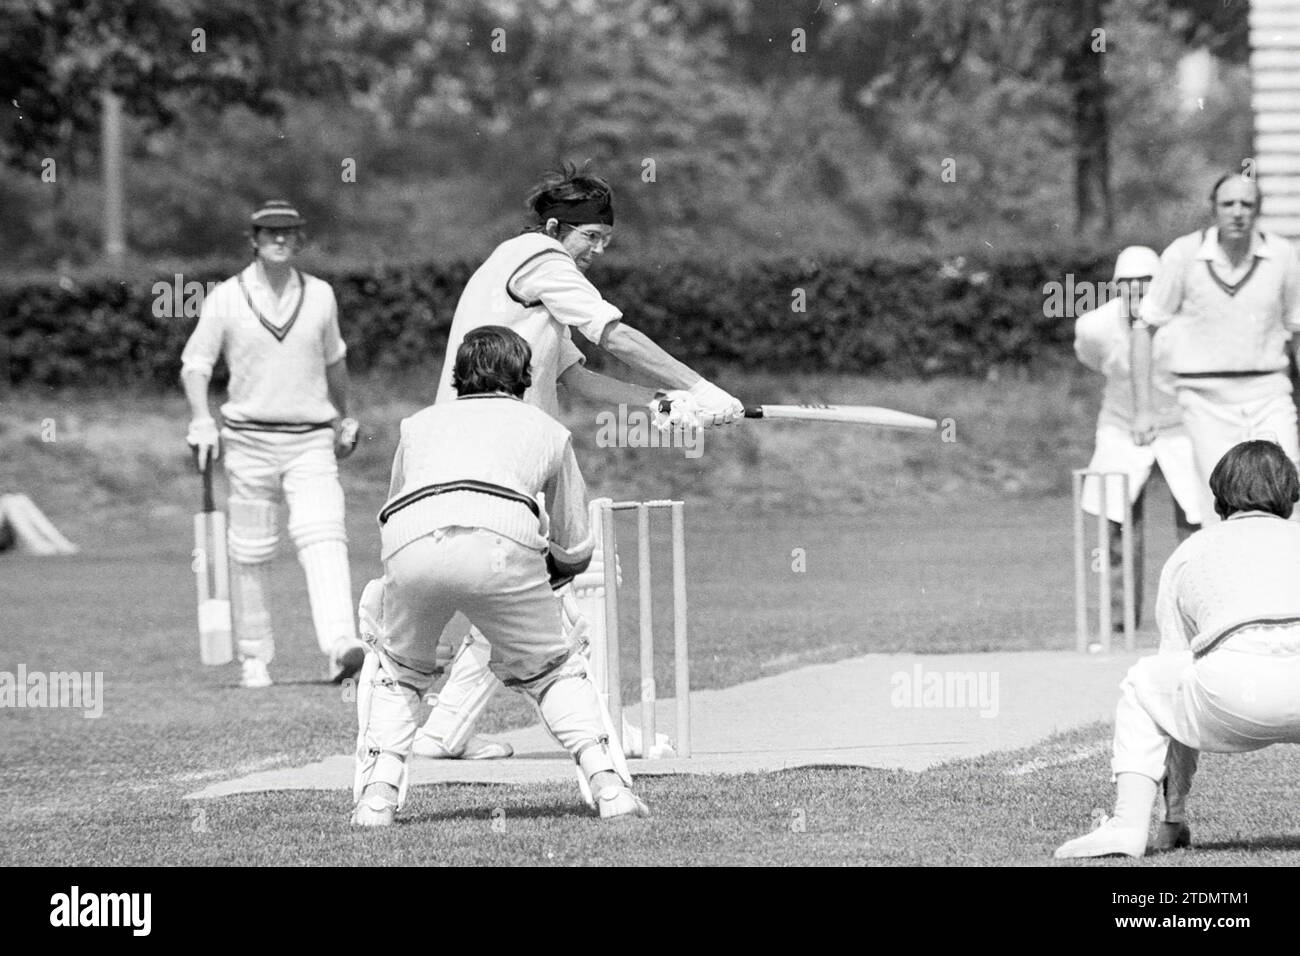 Cricket: Bloemendaal - HCC 2, Cricket, 23-05-1976, Whizgle News from the Past, Tailored for the Future. Explore historical narratives, Dutch The Netherlands agency image with a modern perspective, bridging the gap between yesterday's events and tomorrow's insights. A timeless journey shaping the stories that shape our future Stock Photo